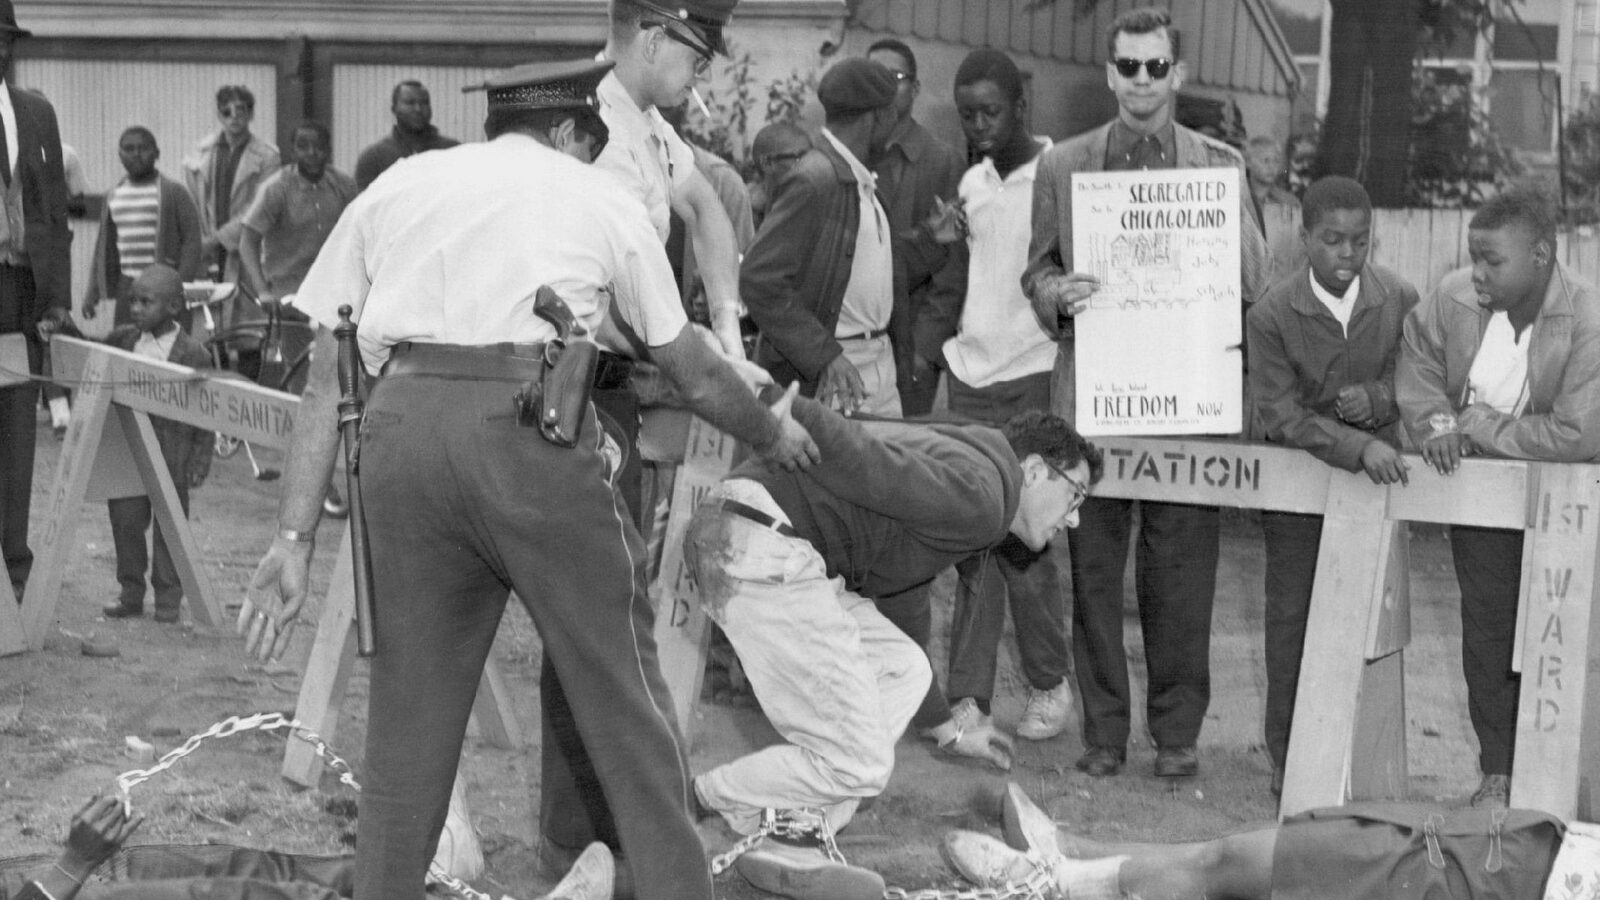 Chicago Police arrest Bernie Sanders during a civil rights protest on August 13, 1963.